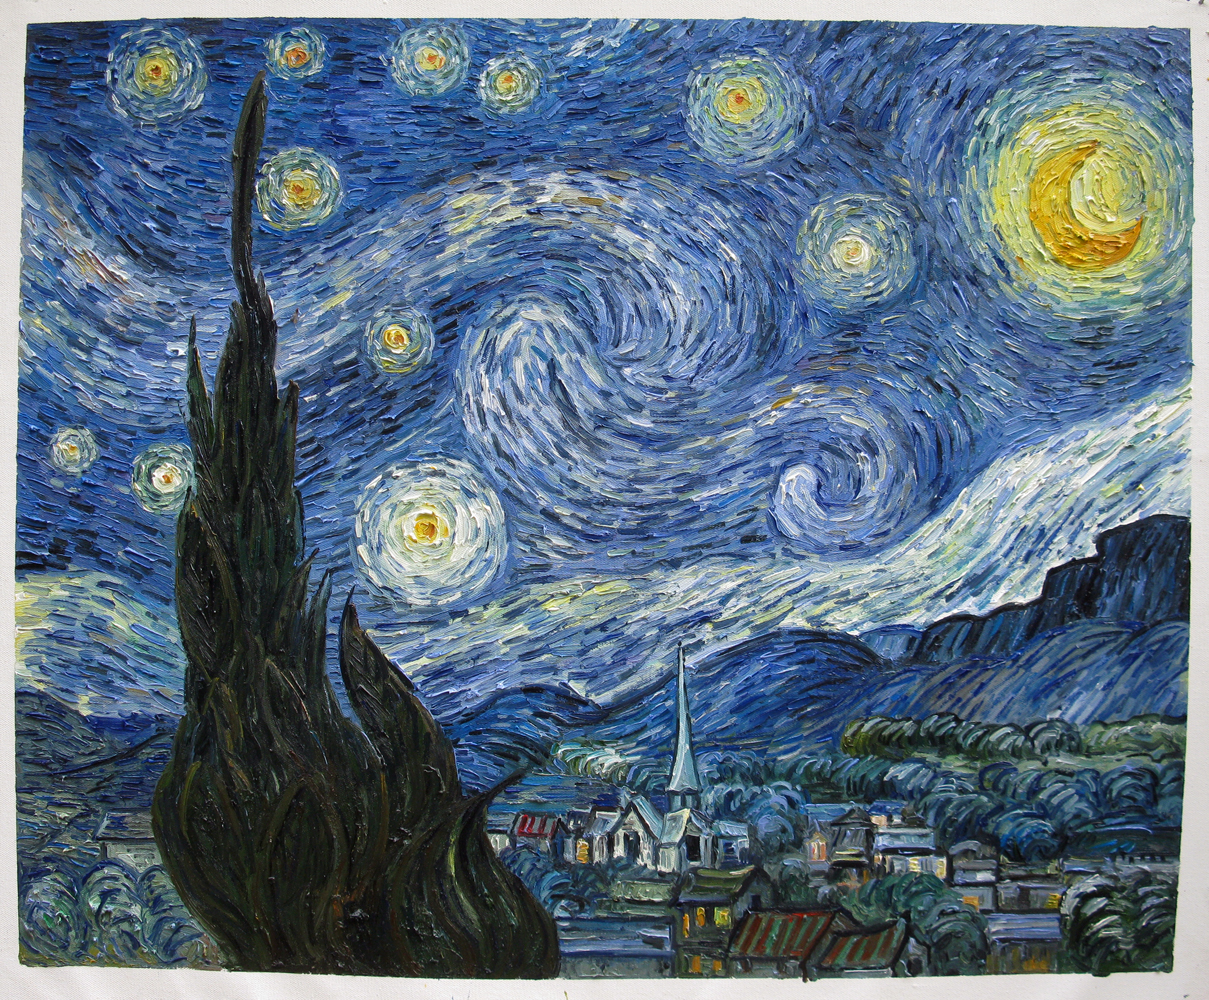 Starry Night Van Gogh Reproduction, hand-painted in oil on canvas